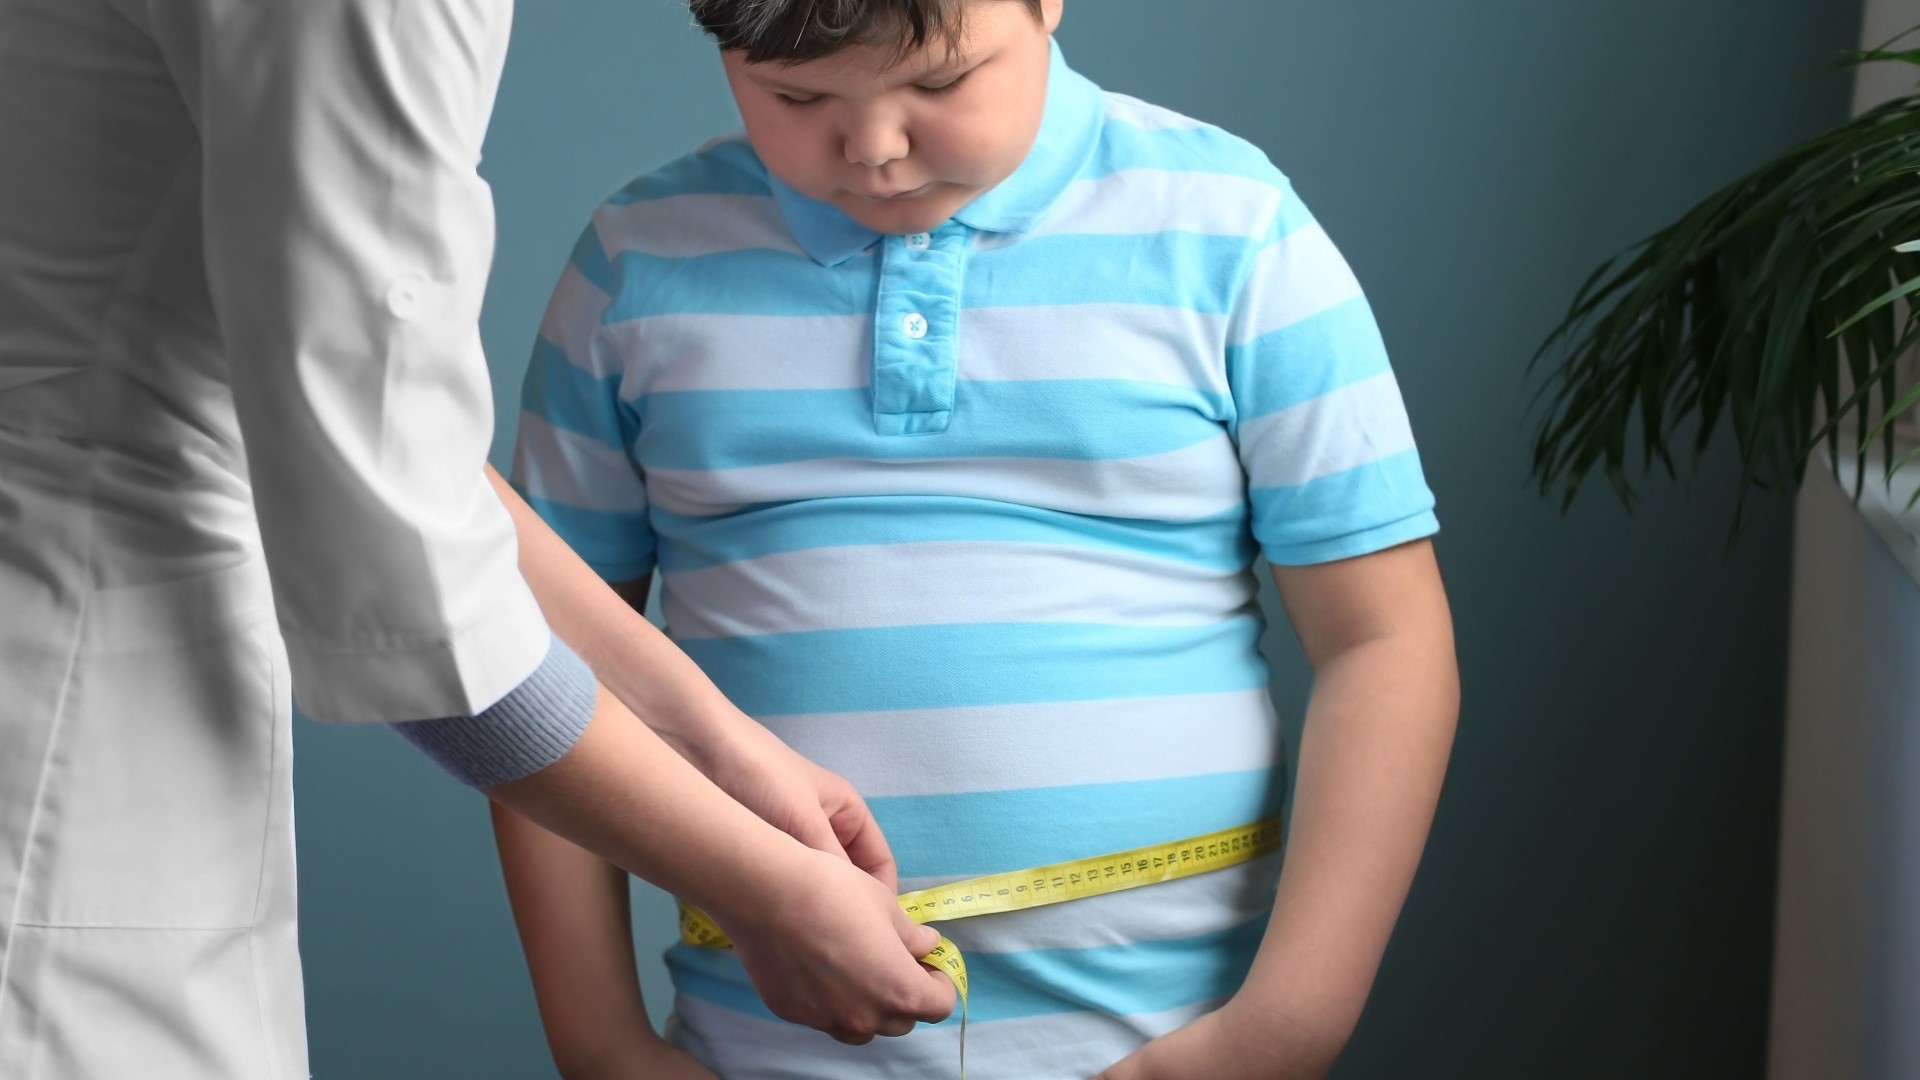 Sponsored by: Endoscopic Wellness Center of America. Dr. Richard Allen Blosser shares tips on an innovative procedure that can help people struggling with obesity.